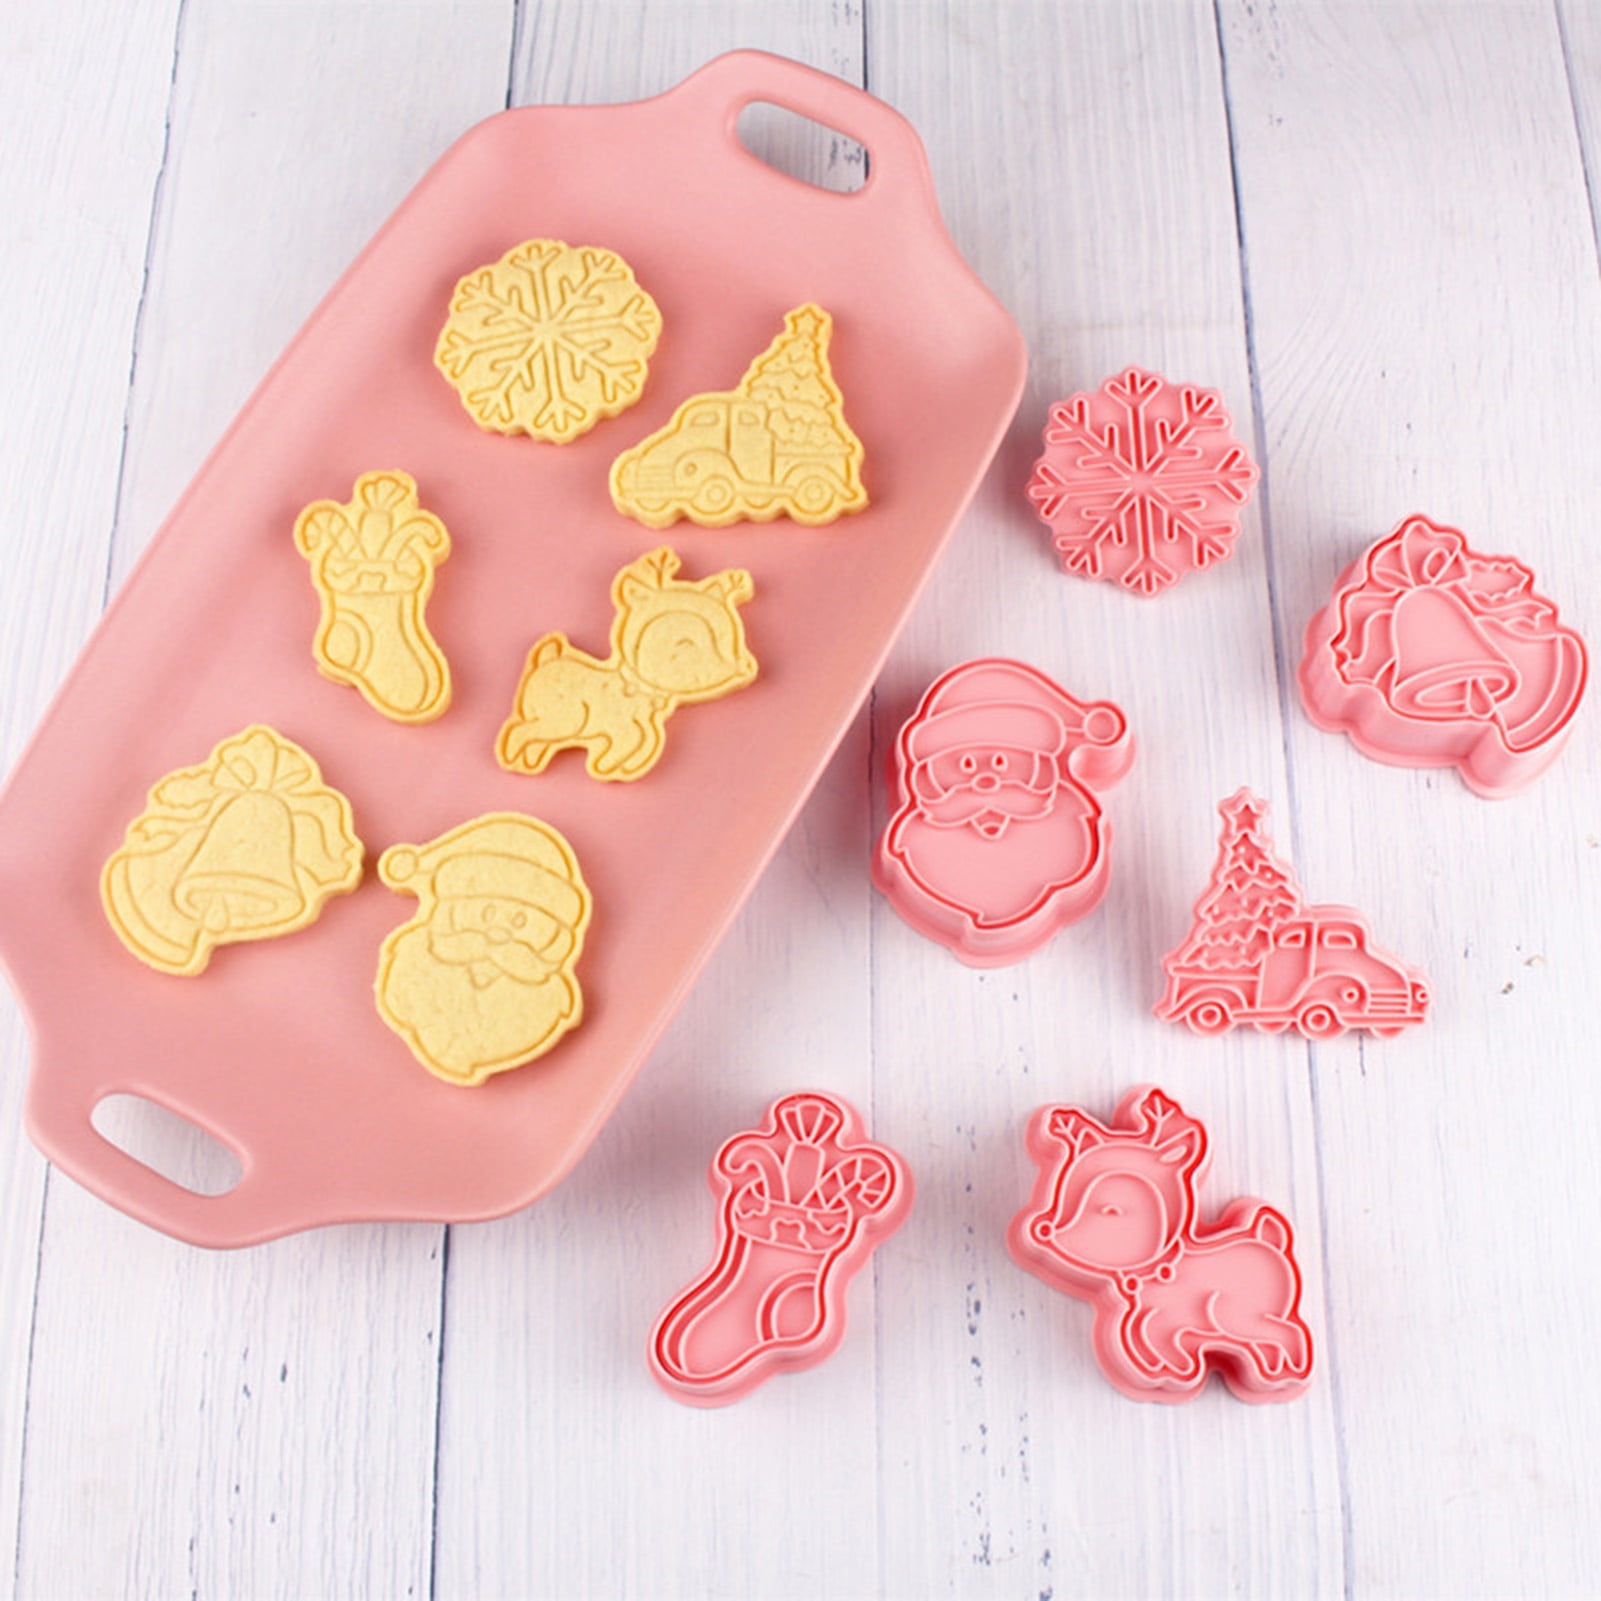 Cat Head Cookie Cutter Polymer Clay Jewelry Fondant Biscuit Dough Cutters Details about   New 